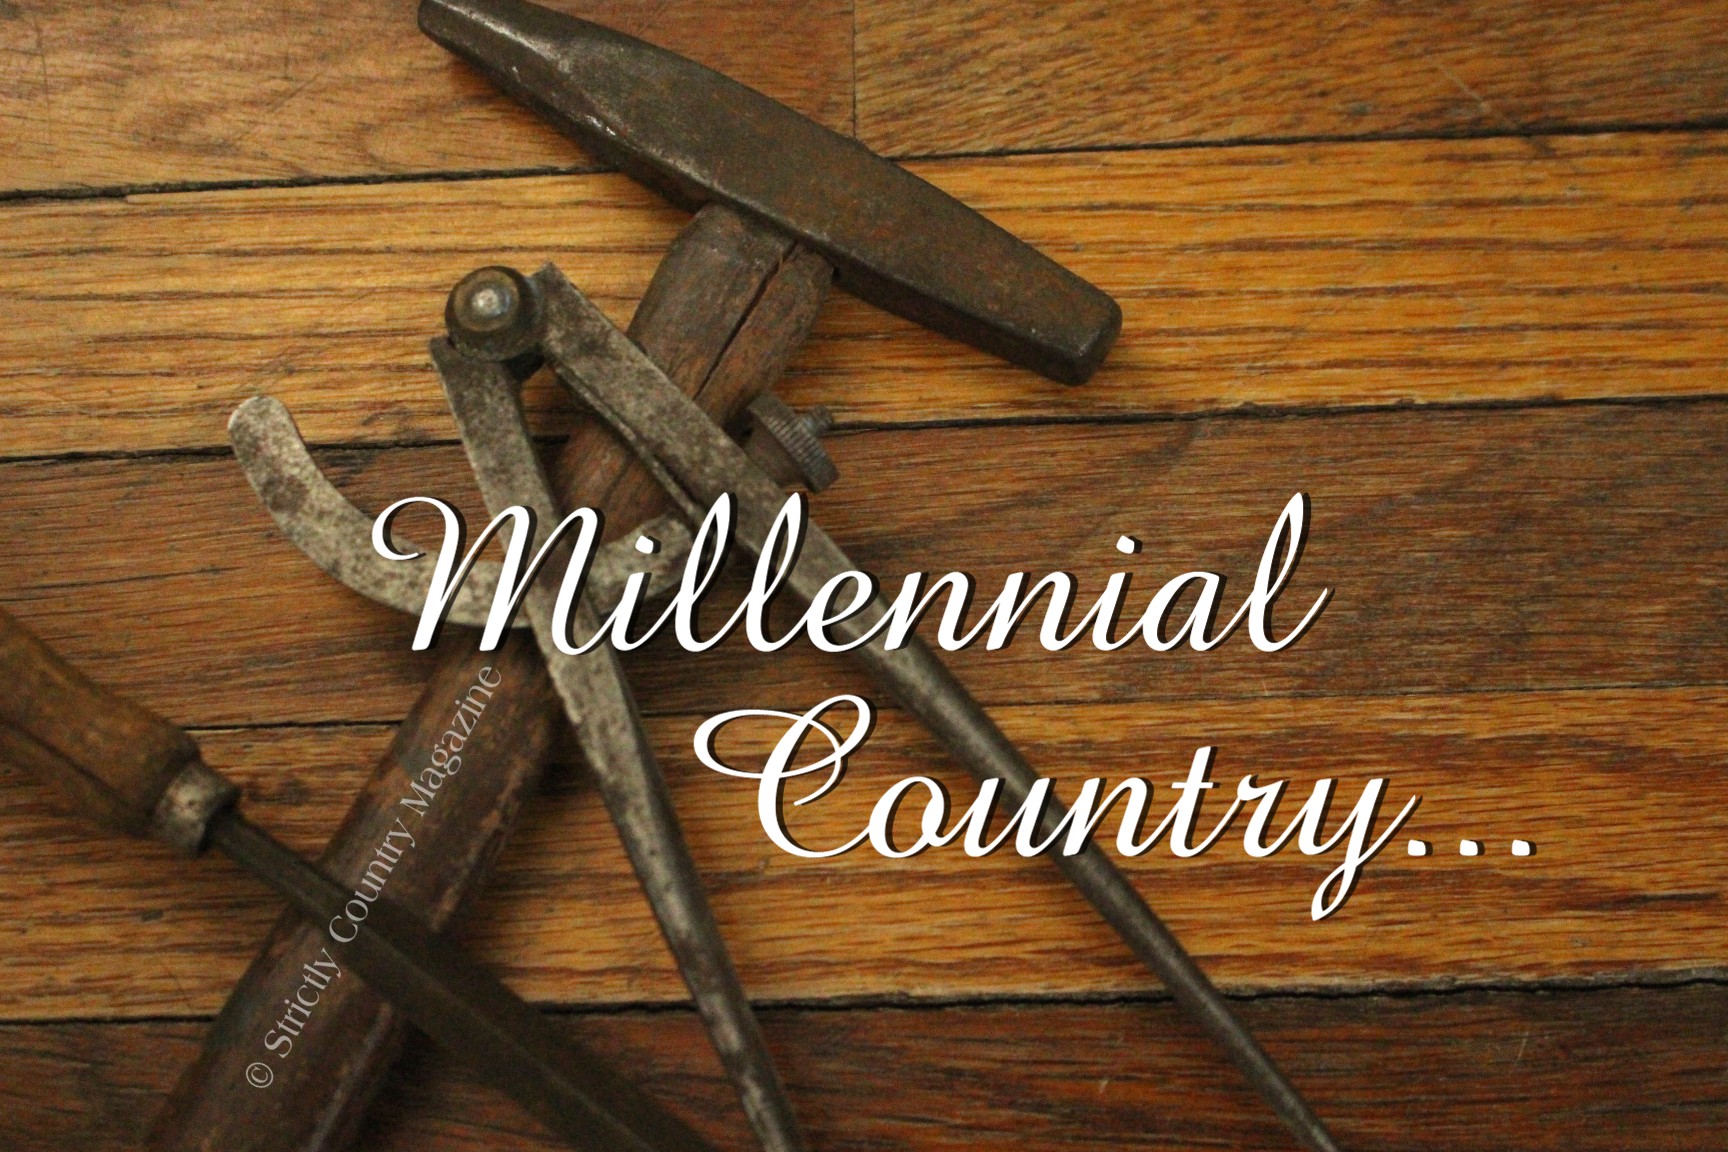 Strictly Country Magazine copyright Millennial Country title